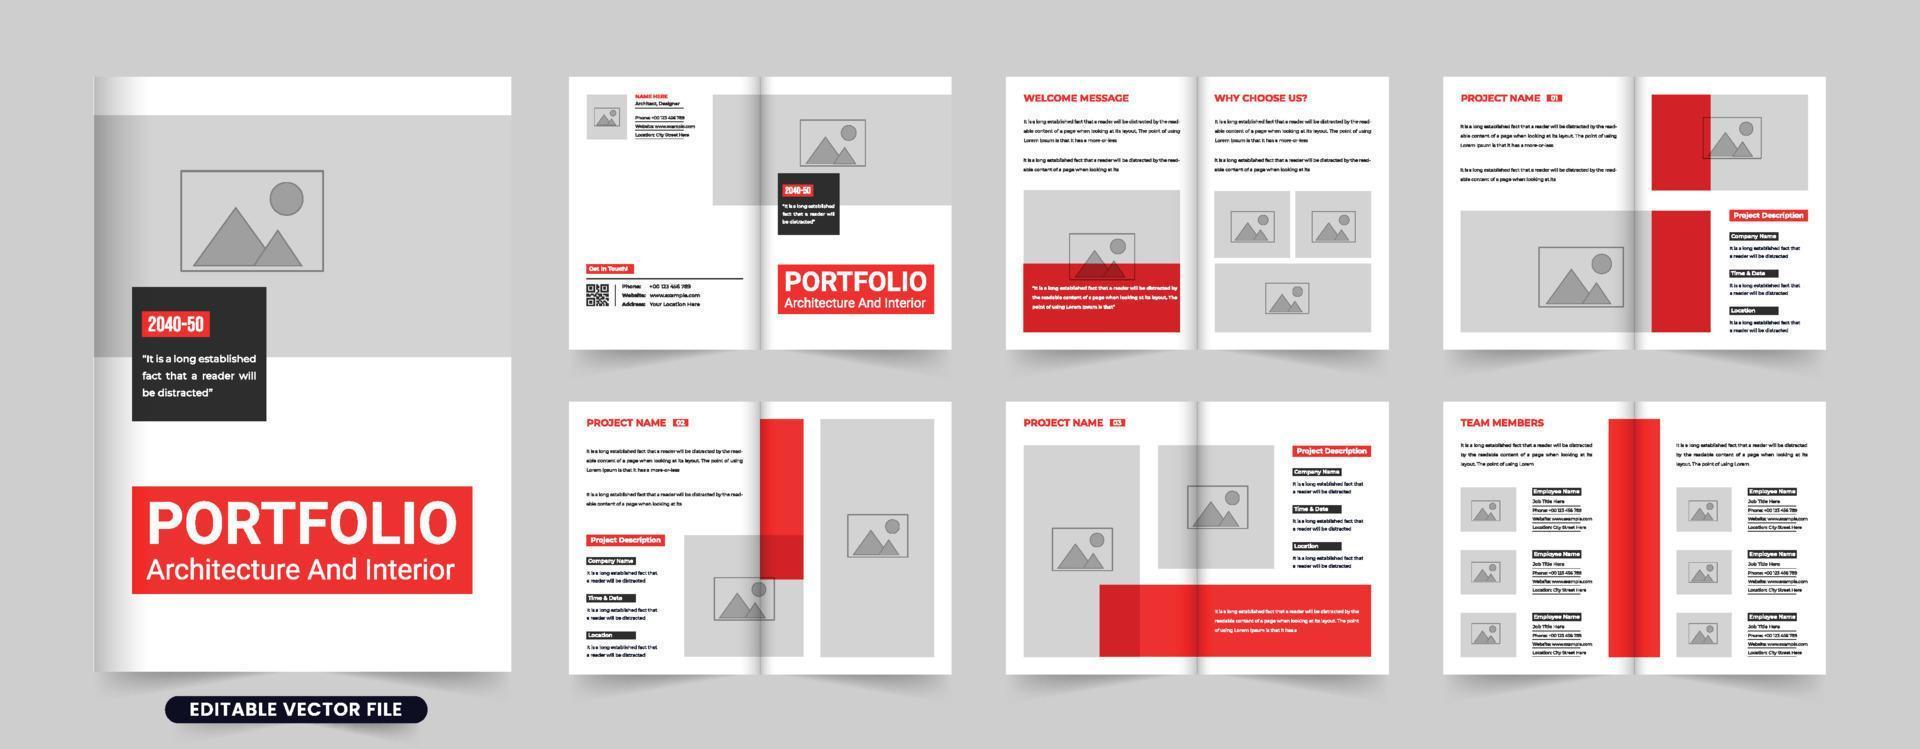 Architect profile and project overview booklet vector for marketing. Real estate architecture business magazine template with photo placeholders. Architecture brochure design with red and dark colors.